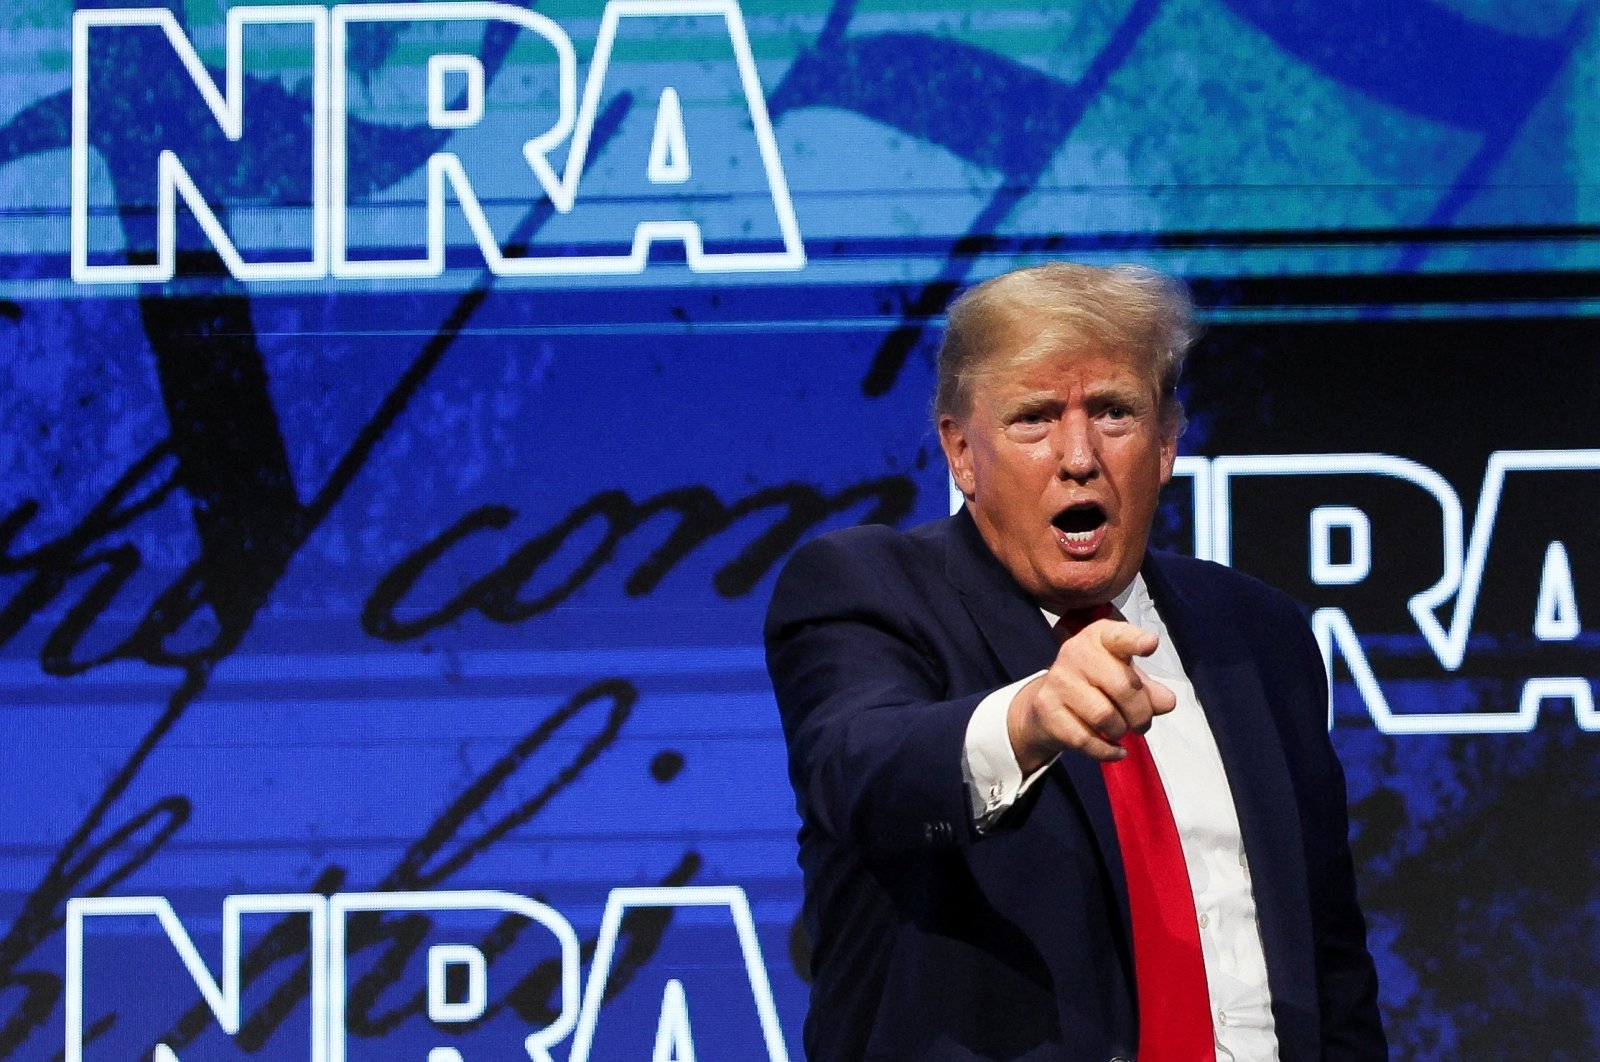 Former U.S. President Donald Trump gestures during the National Rifle Association (NRA) annual convention in Houston, Texas, U.S. May 27, 2022. (Reuters Photo)